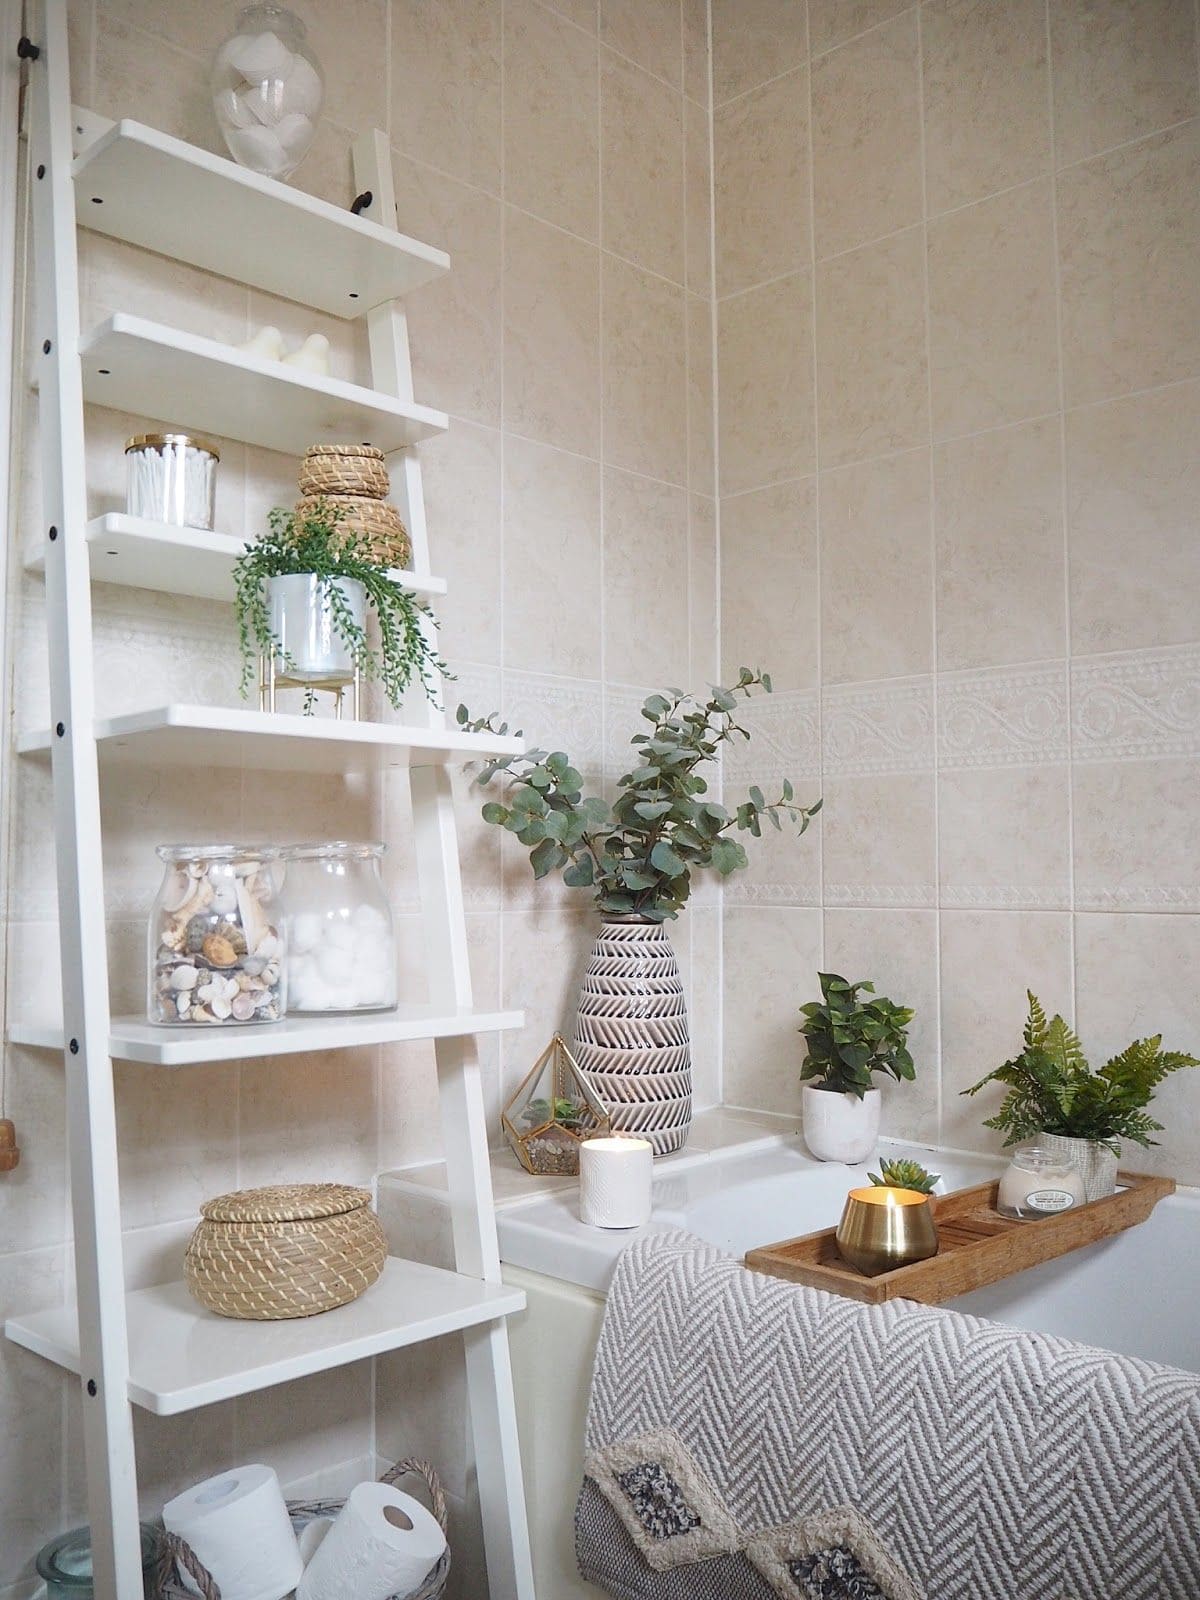 20 best ideas to make your own bathroom plant shelves - 139